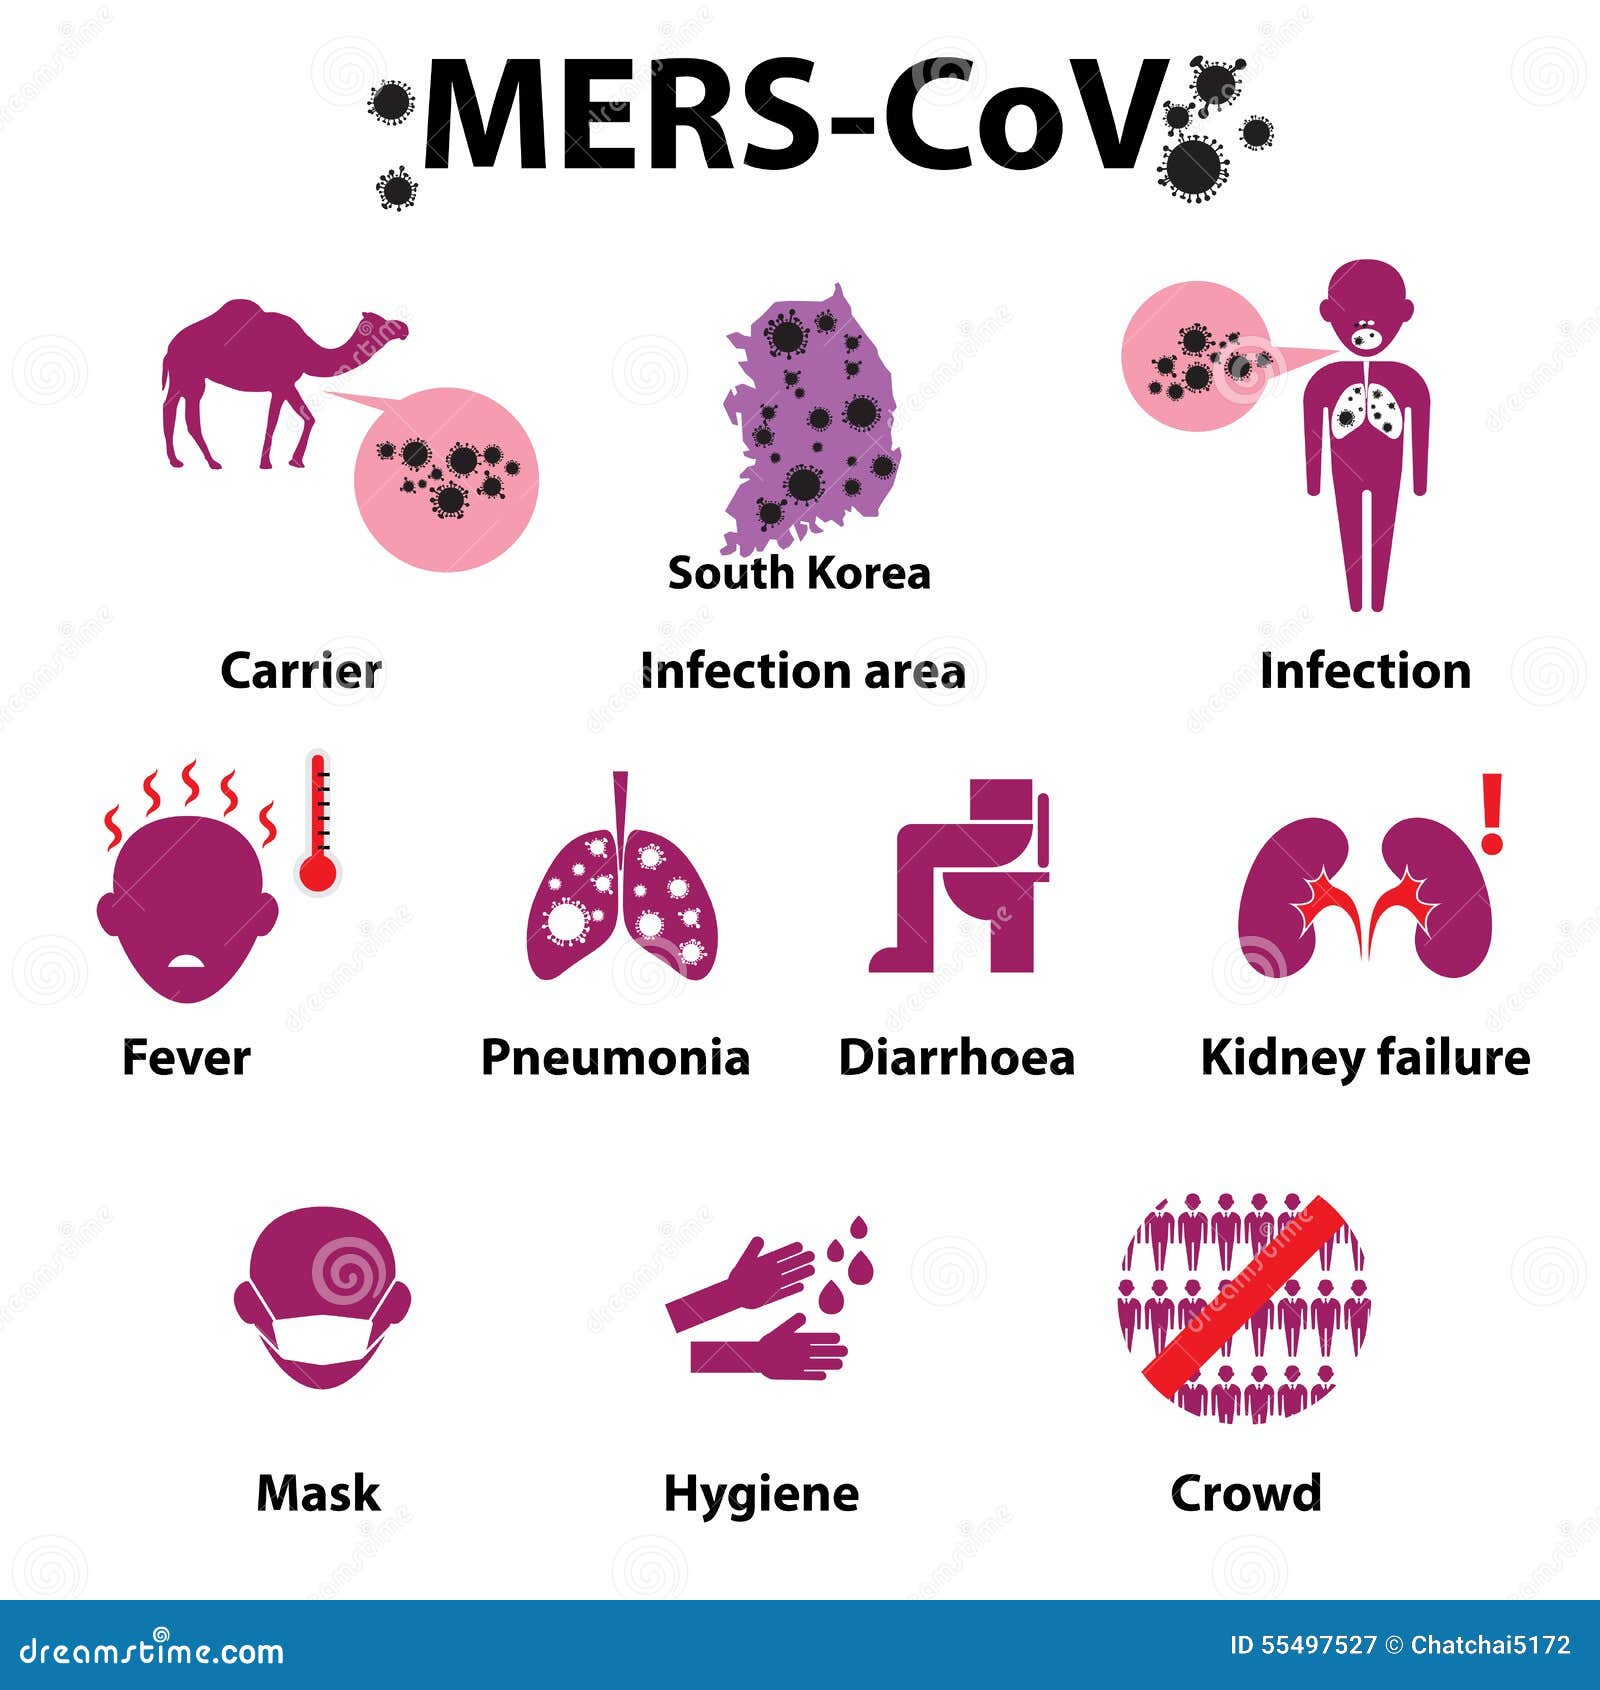 MERS-COV Or Middle East Respiratory Syndrome Corona Virus Stock Vector - Image: 554975271300 x 1390